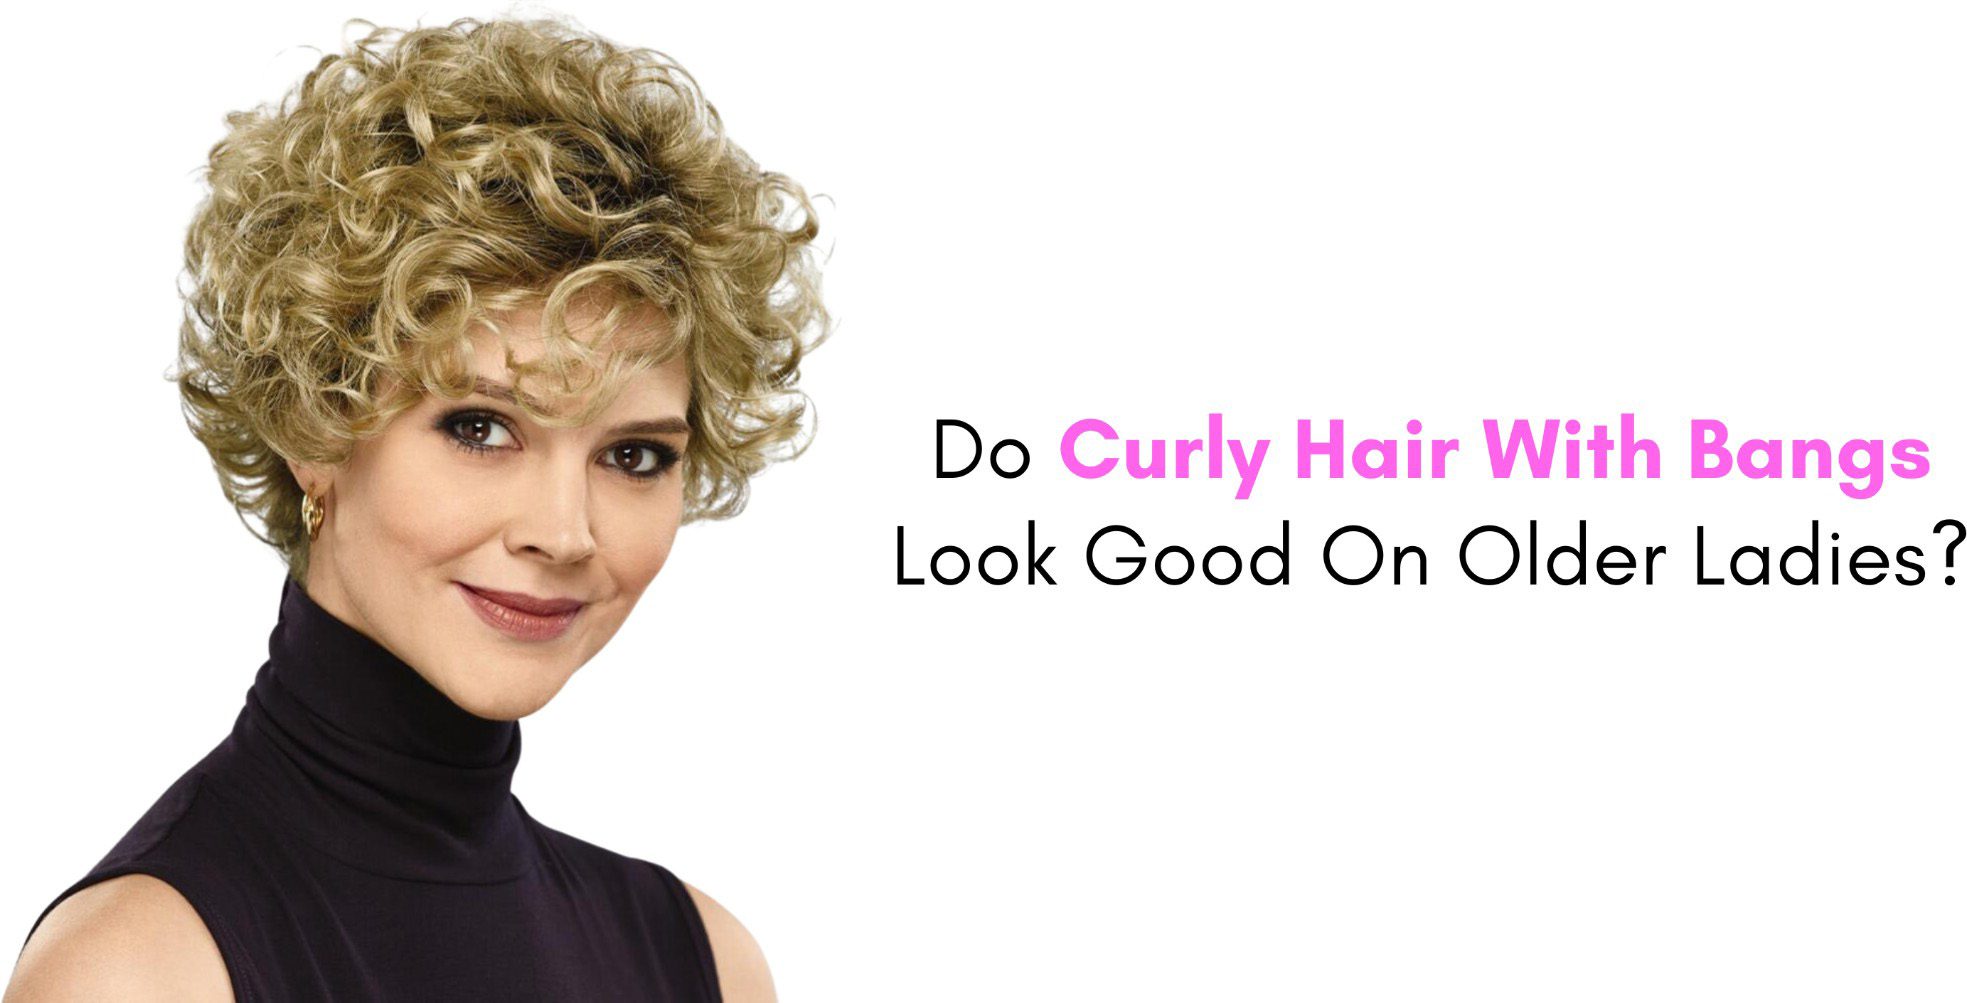 Do Curly Hair With Bangs Look Good On Older Ladies?